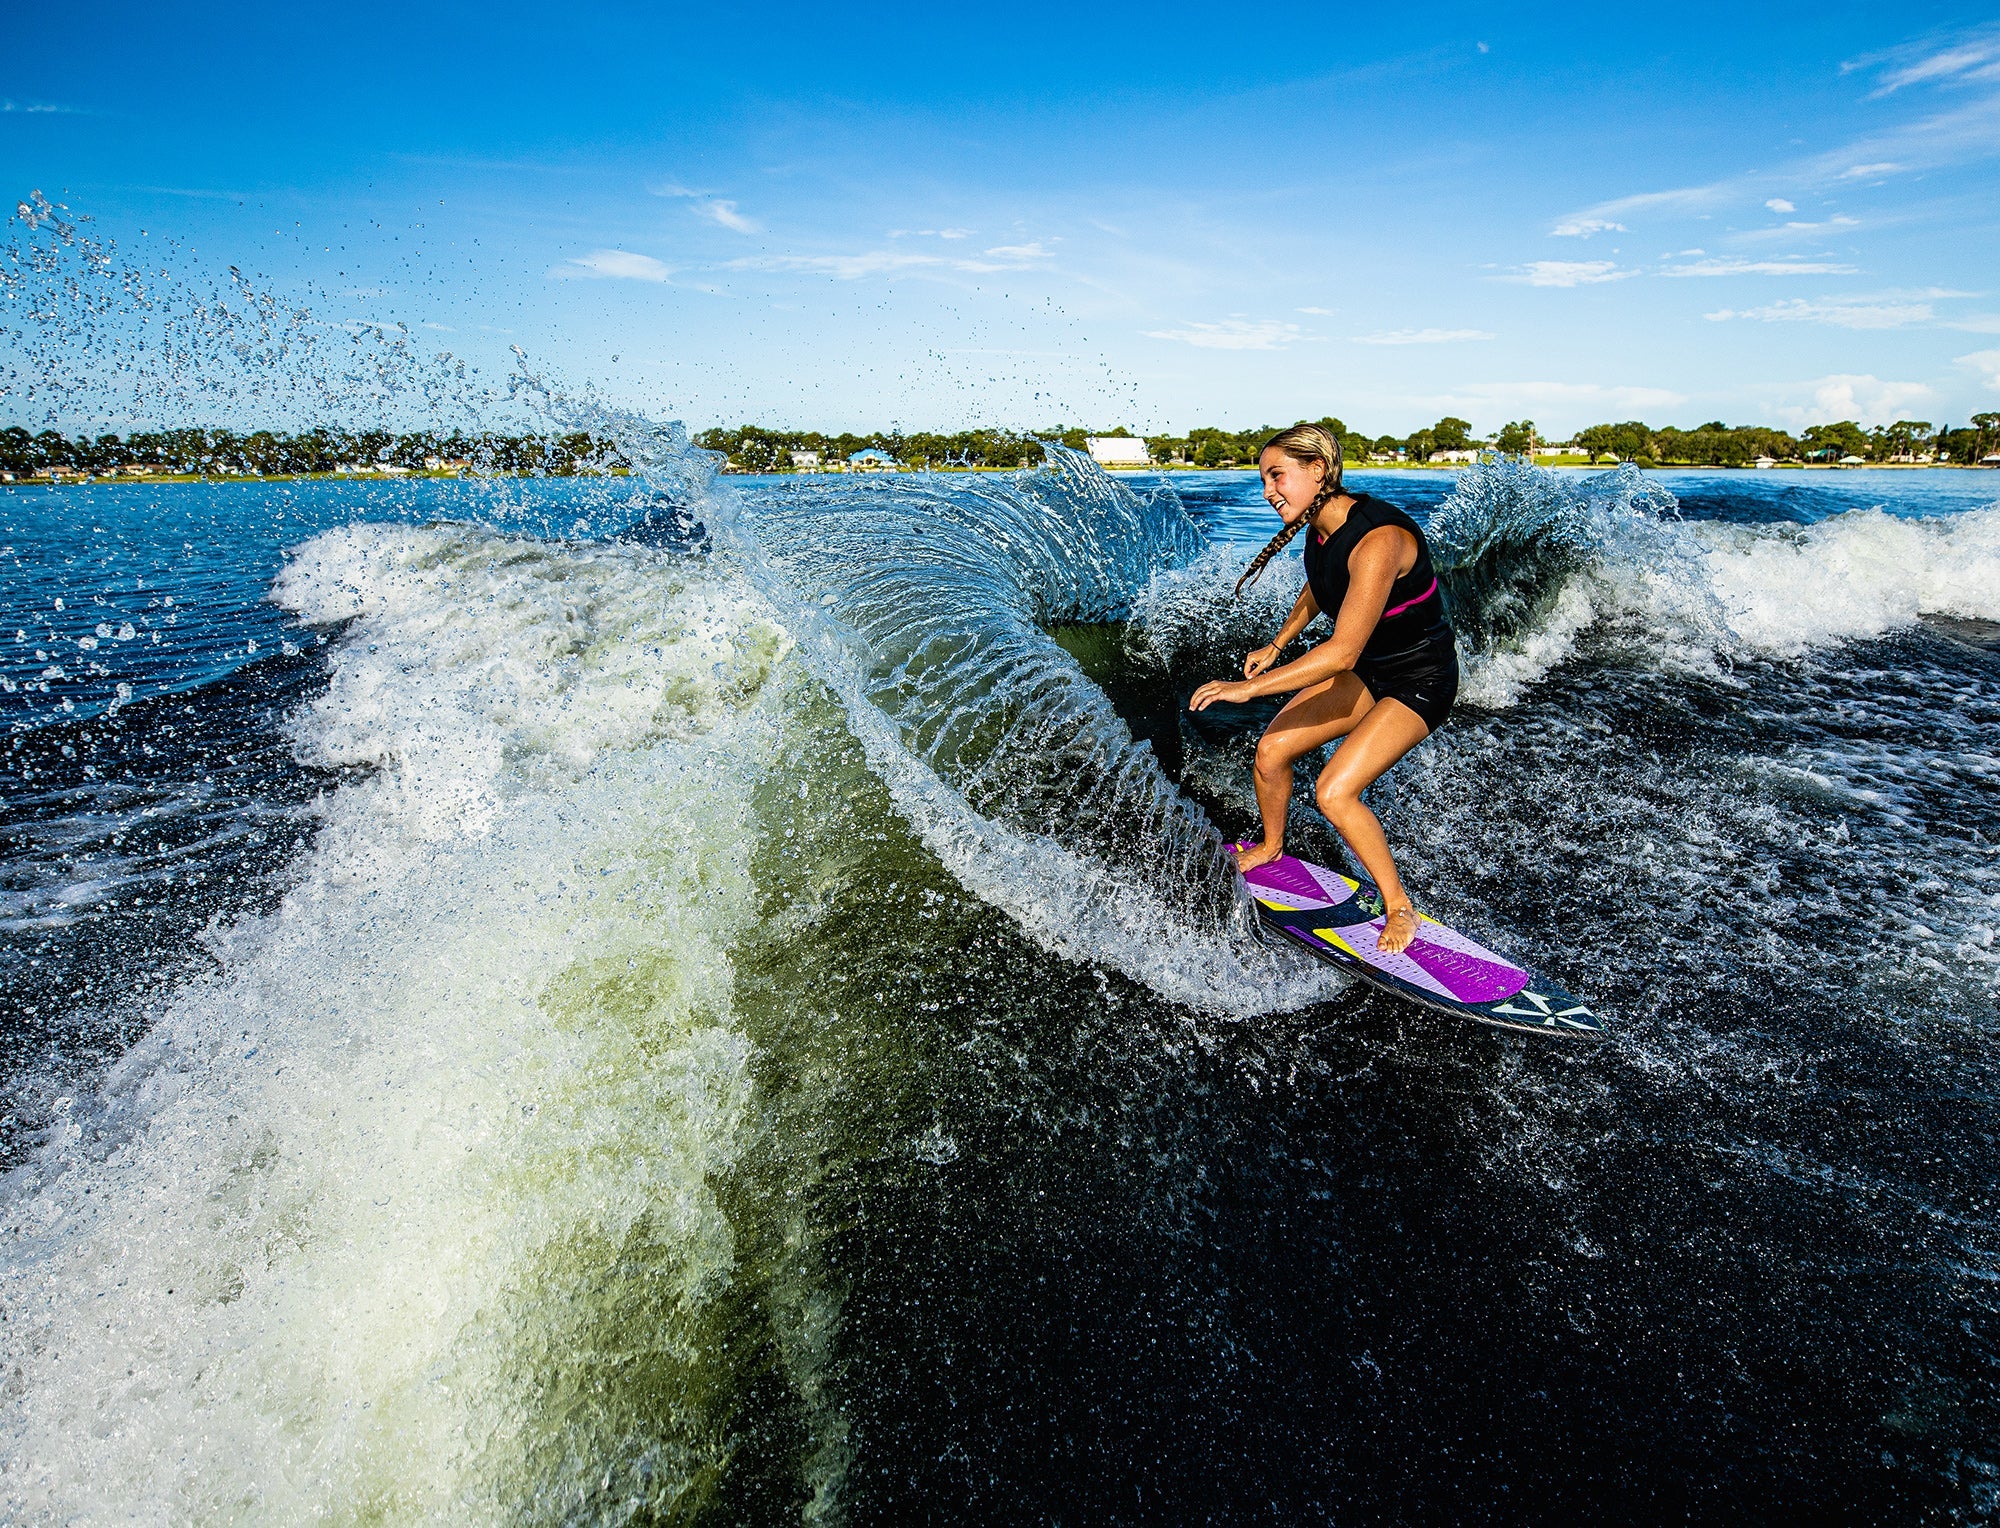 A woman riding a wave on a surfboard, showcasing her impressive skills in skim style. She confidently maneuvers on the Phase 5 2023 Diamond Luv Wakesurf Board, which features advanced construction materials such as Carbon Inn.